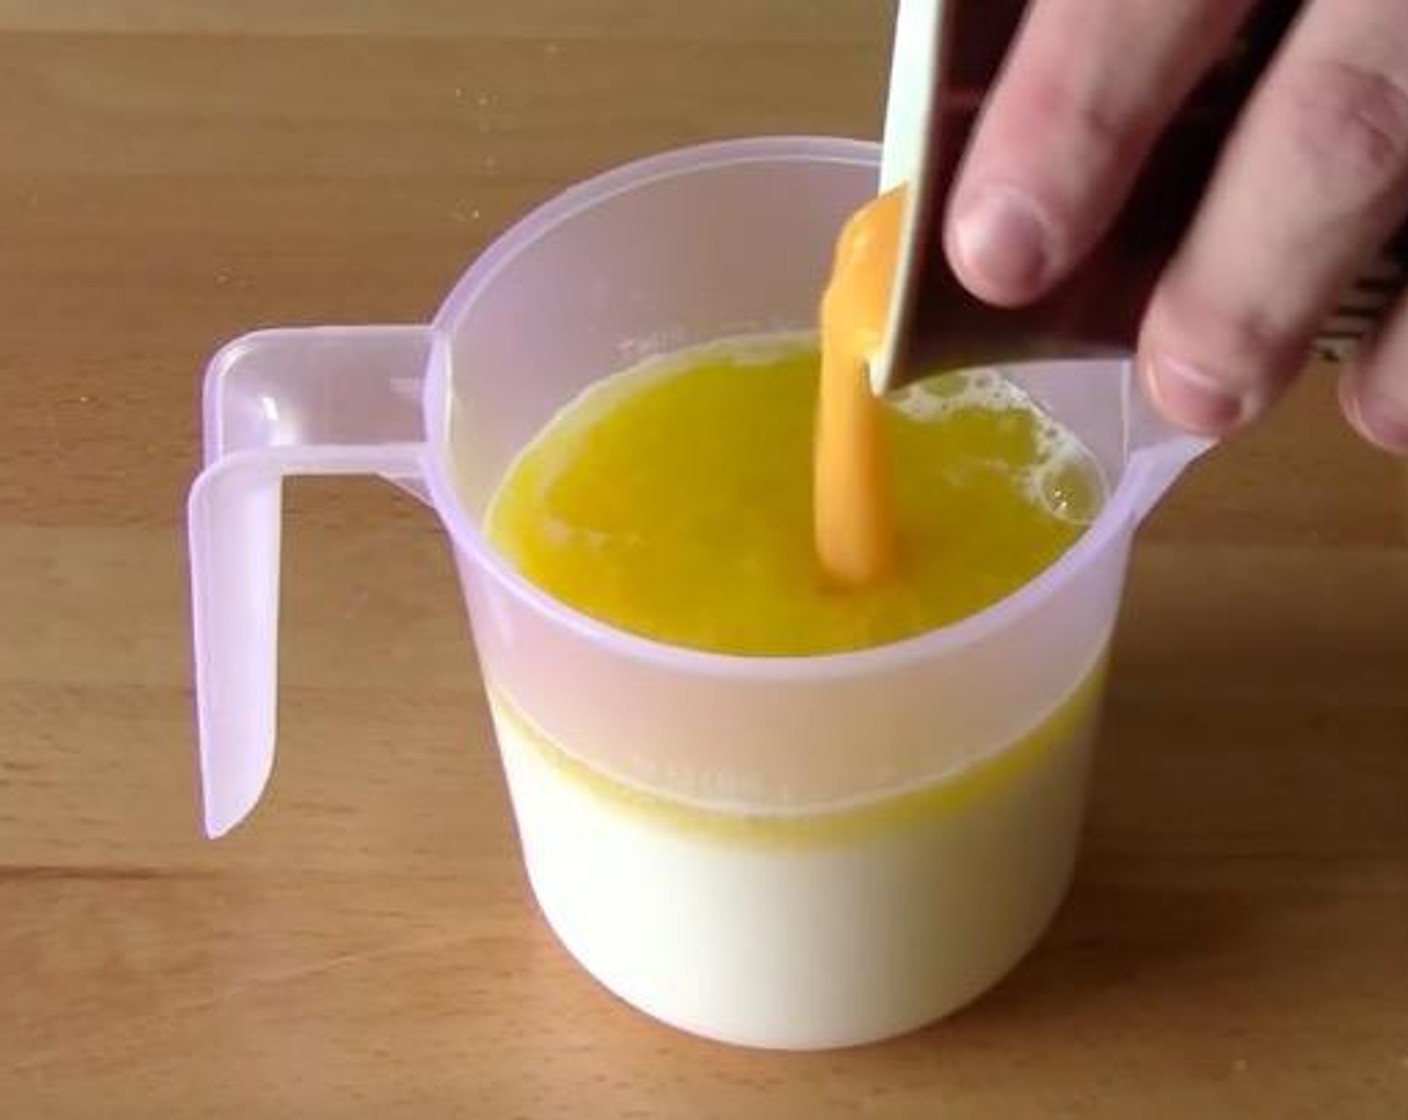 step 3 Put the Milk (1 1/2 cups) into a jug. Add Butter (1/4 cup) and Egg (1) into the same jug and mix them together.